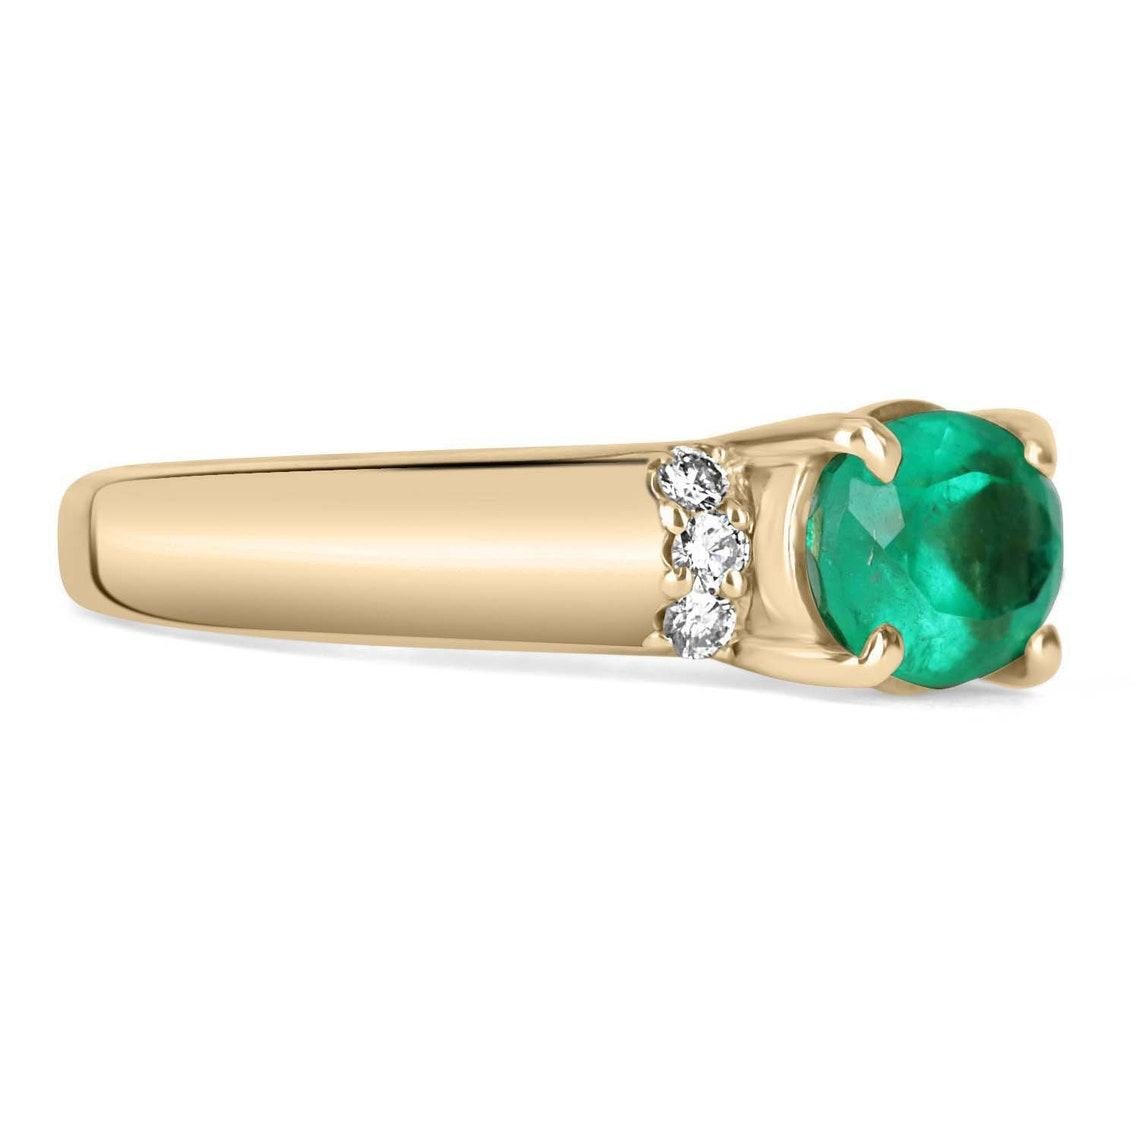 Displayed is a Colombian emerald & diamond accent ring in 18K yellow gold. This gorgeous ring carries a full 1.60-carat emerald in a four-prong setting. Fully faceted, this gemstone showcases excellent shine. The emerald has good clarity with minor